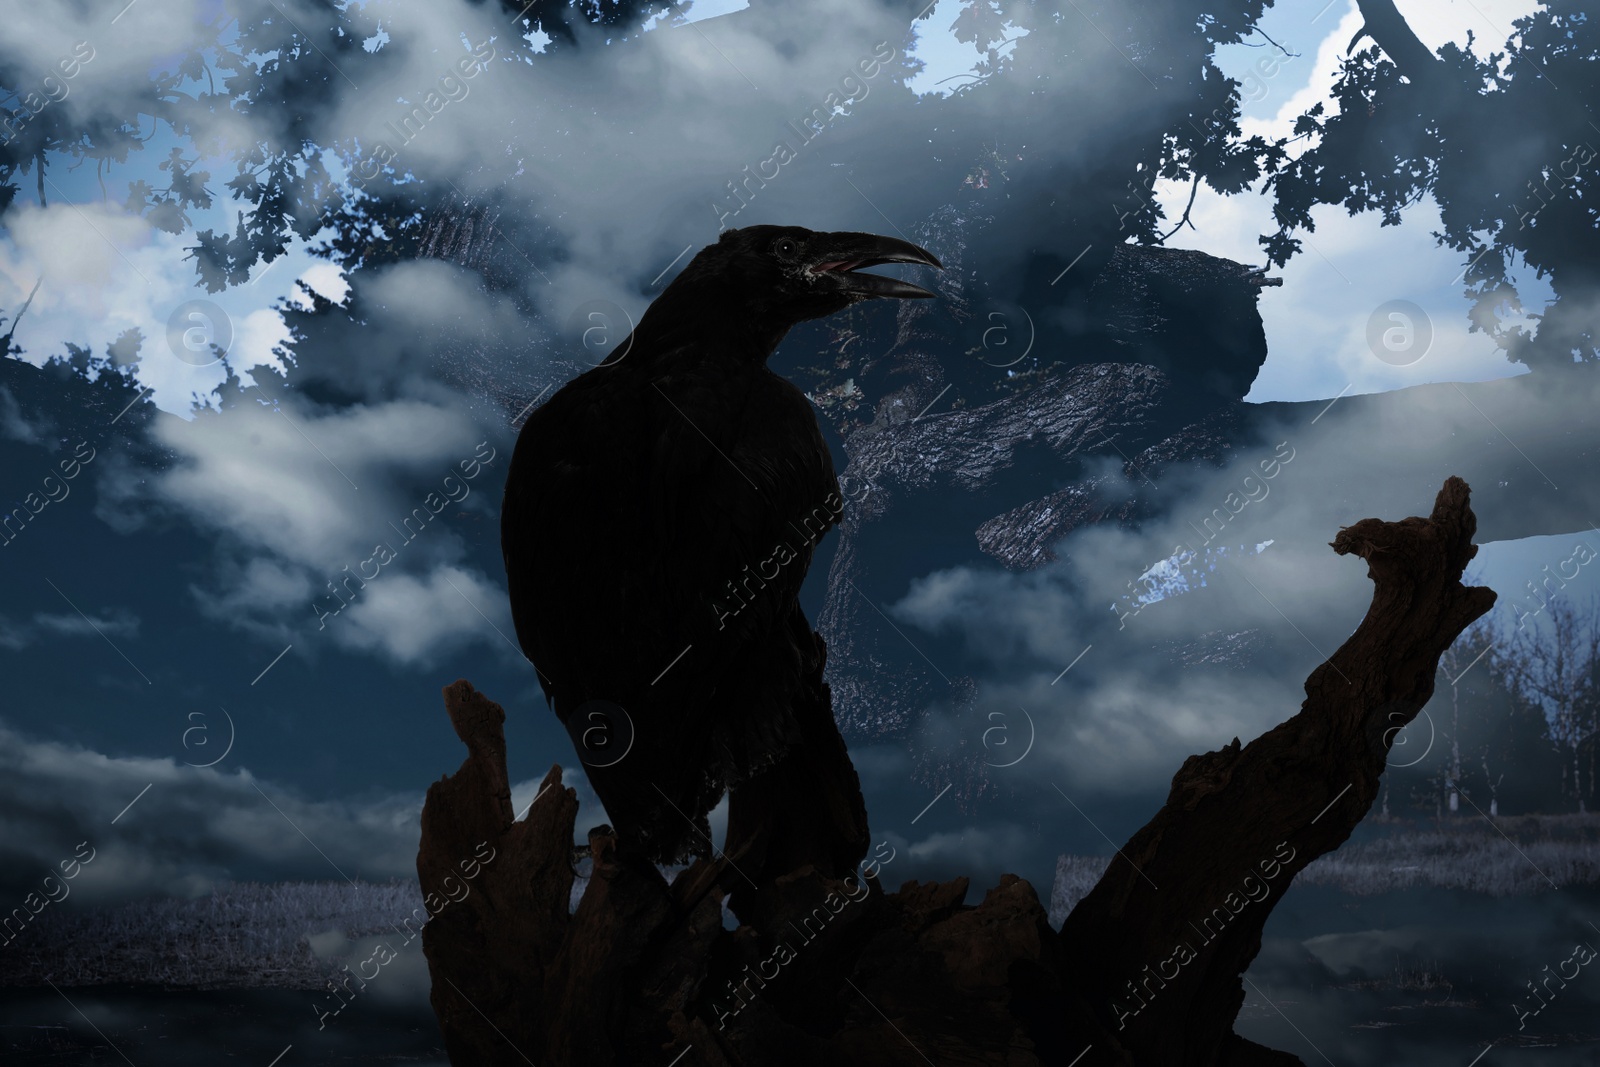 Image of Black crow croaking in creepy misty forest. Fantasy world